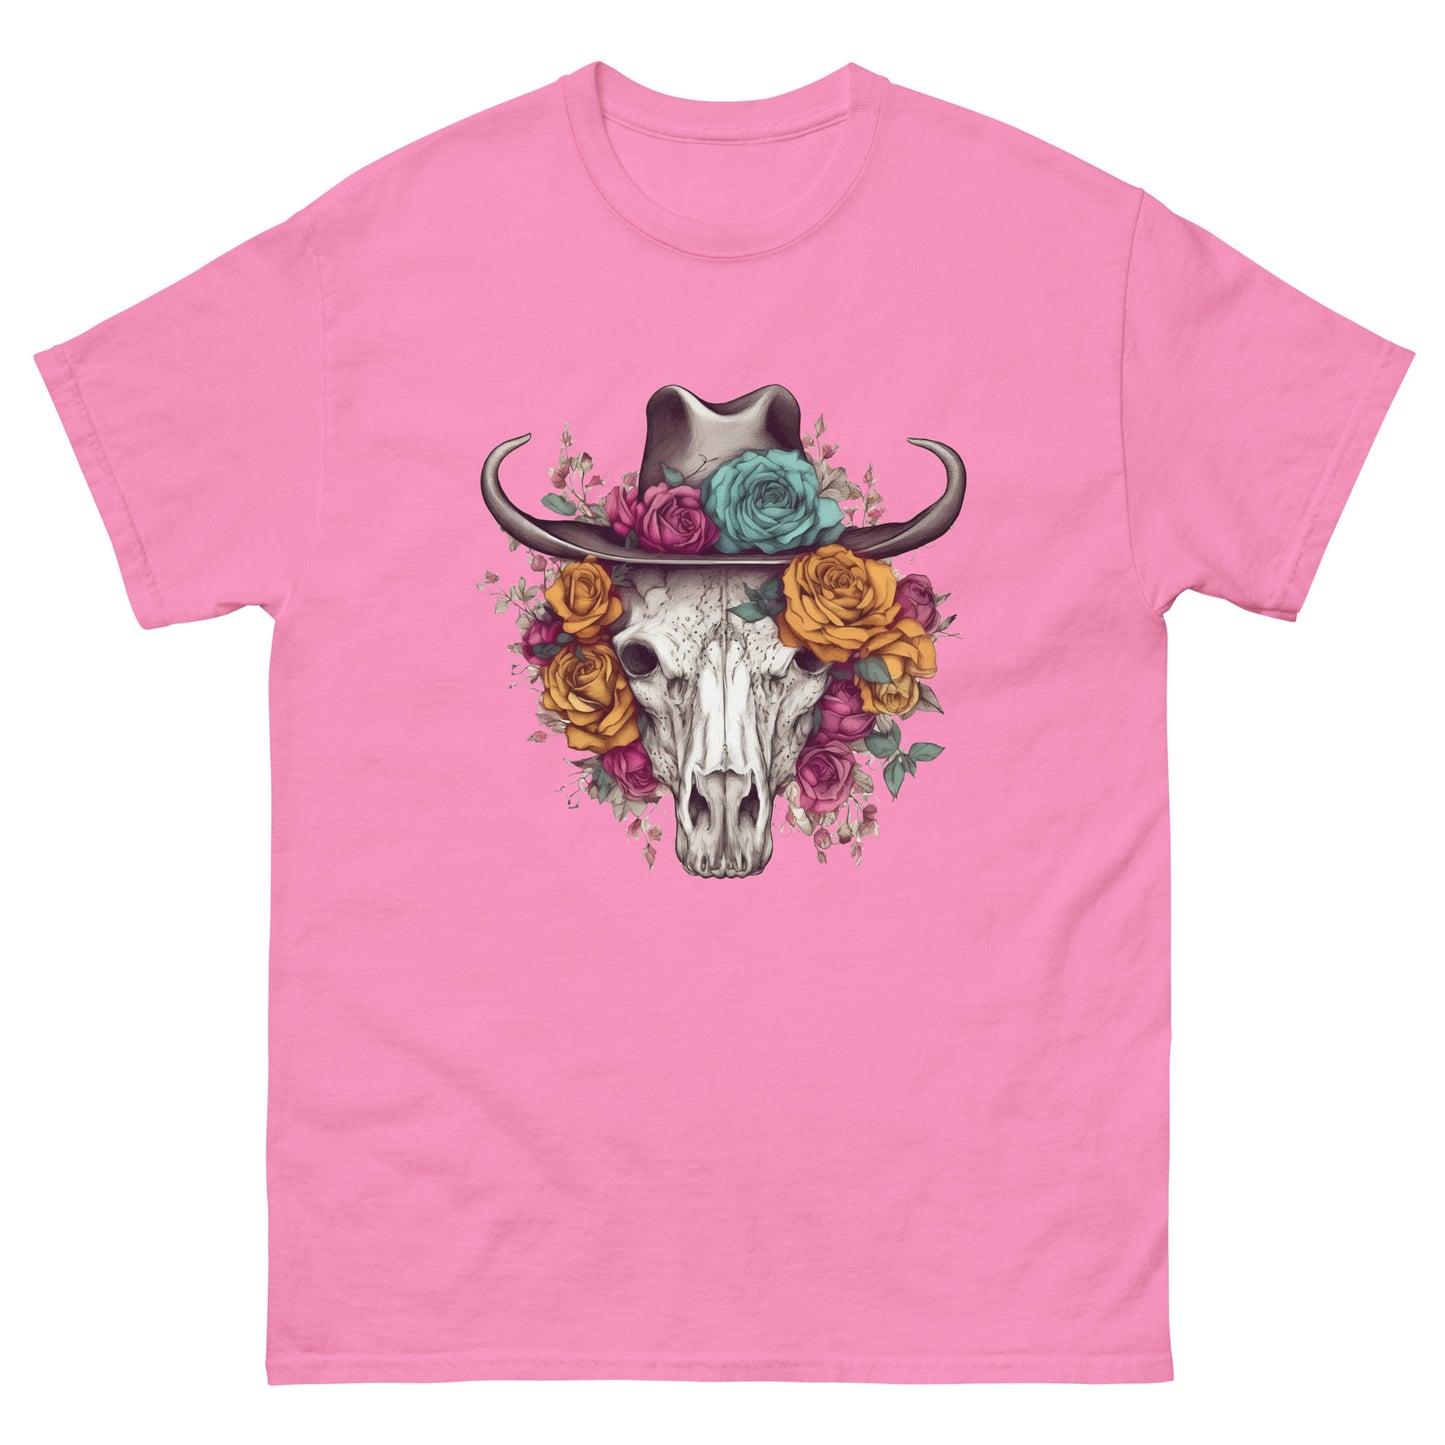 Flowers illustration and bull skull, Horned hat, Bull skull in hat and flowers, Farm portrait on a t-shirt, Folk and country style - Men's classic tee